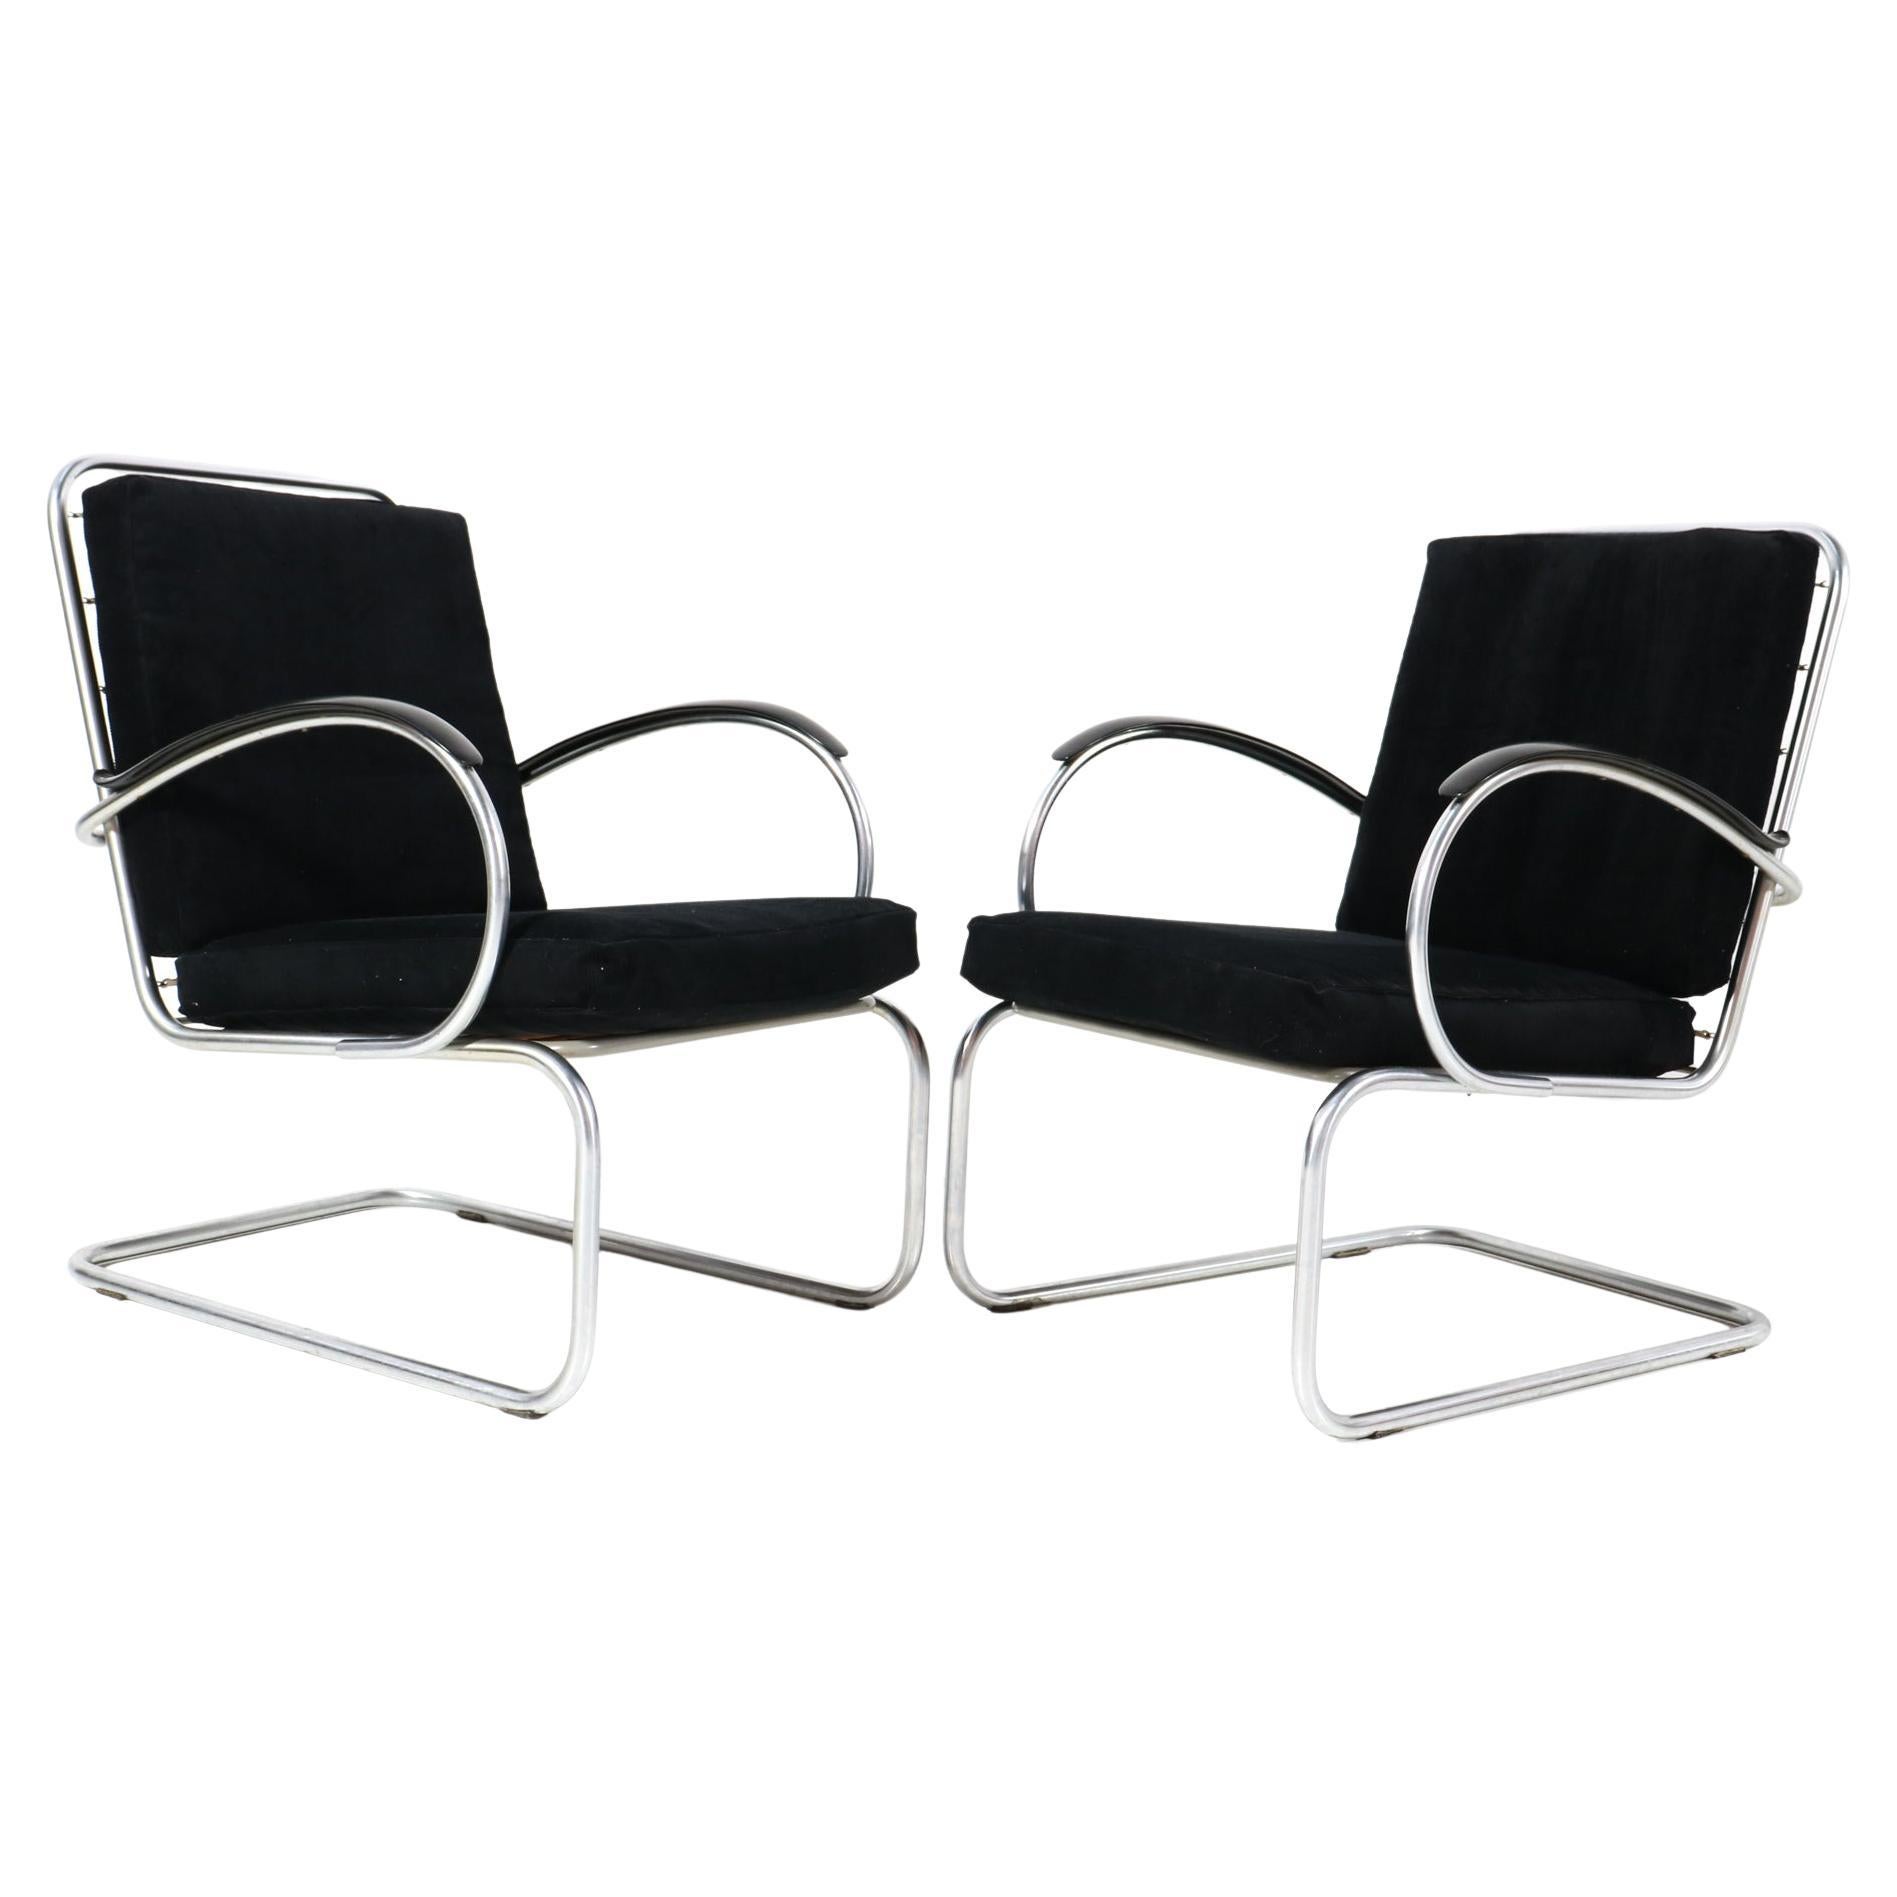 Two Art Deco Bauhaus Model 409 Lounge Chairs by W.H. Gispen for Gispen, 1930s For Sale